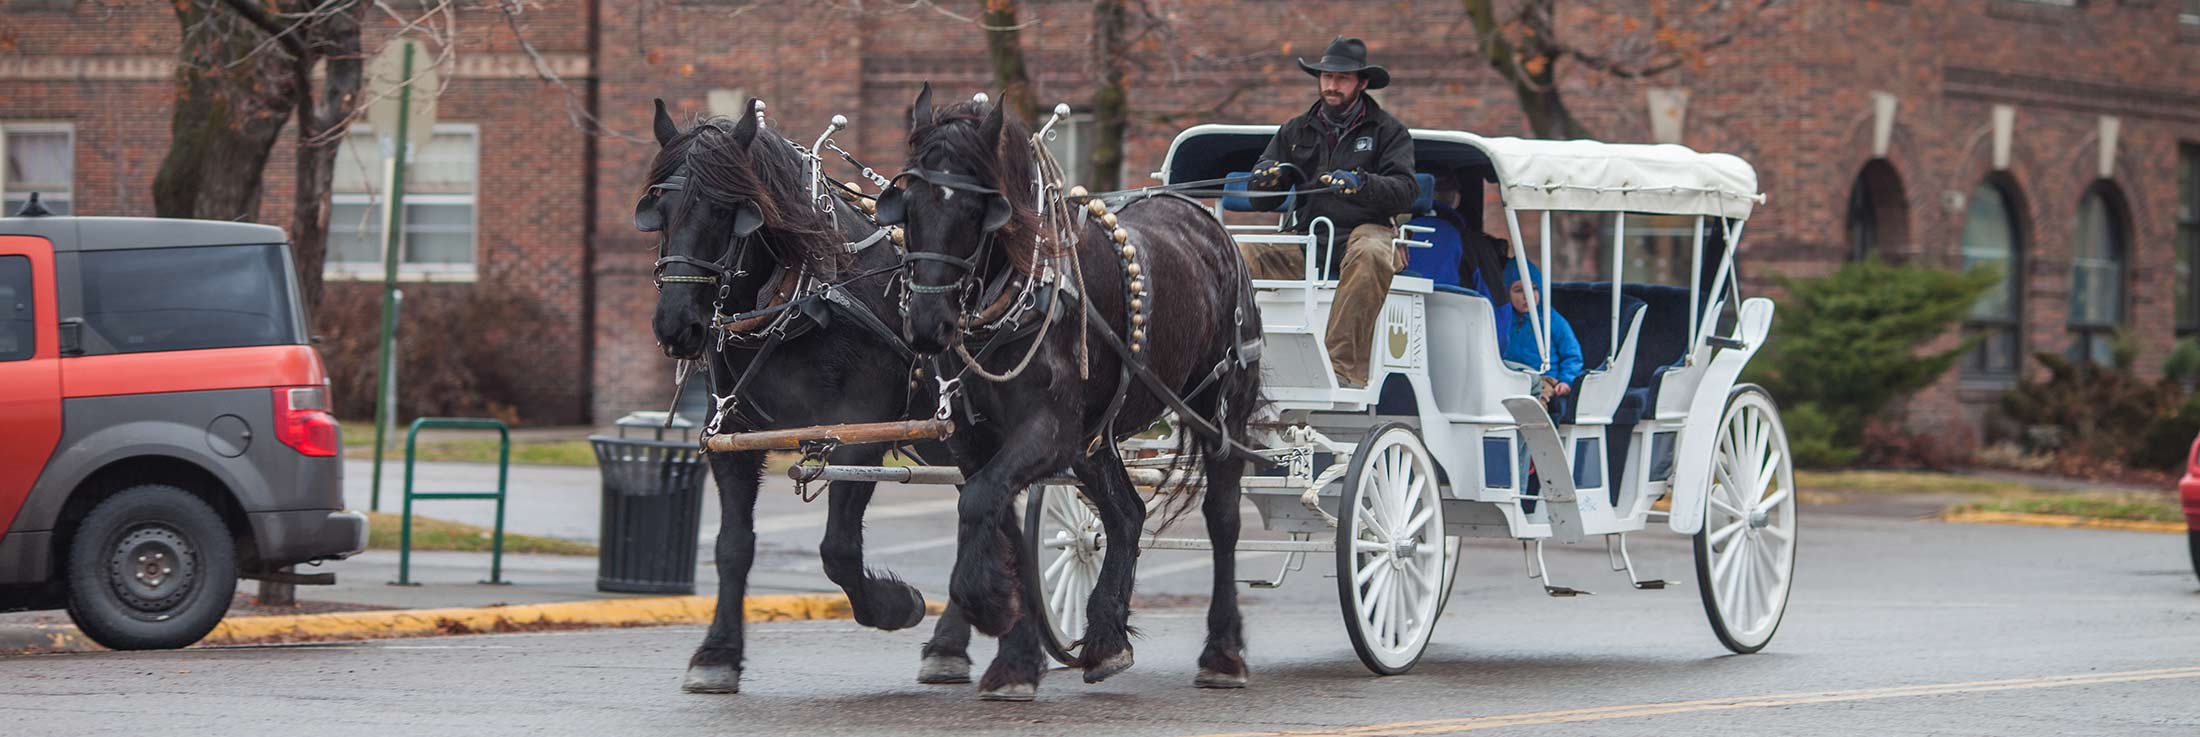 Carriage Rides in Downtown Missoula